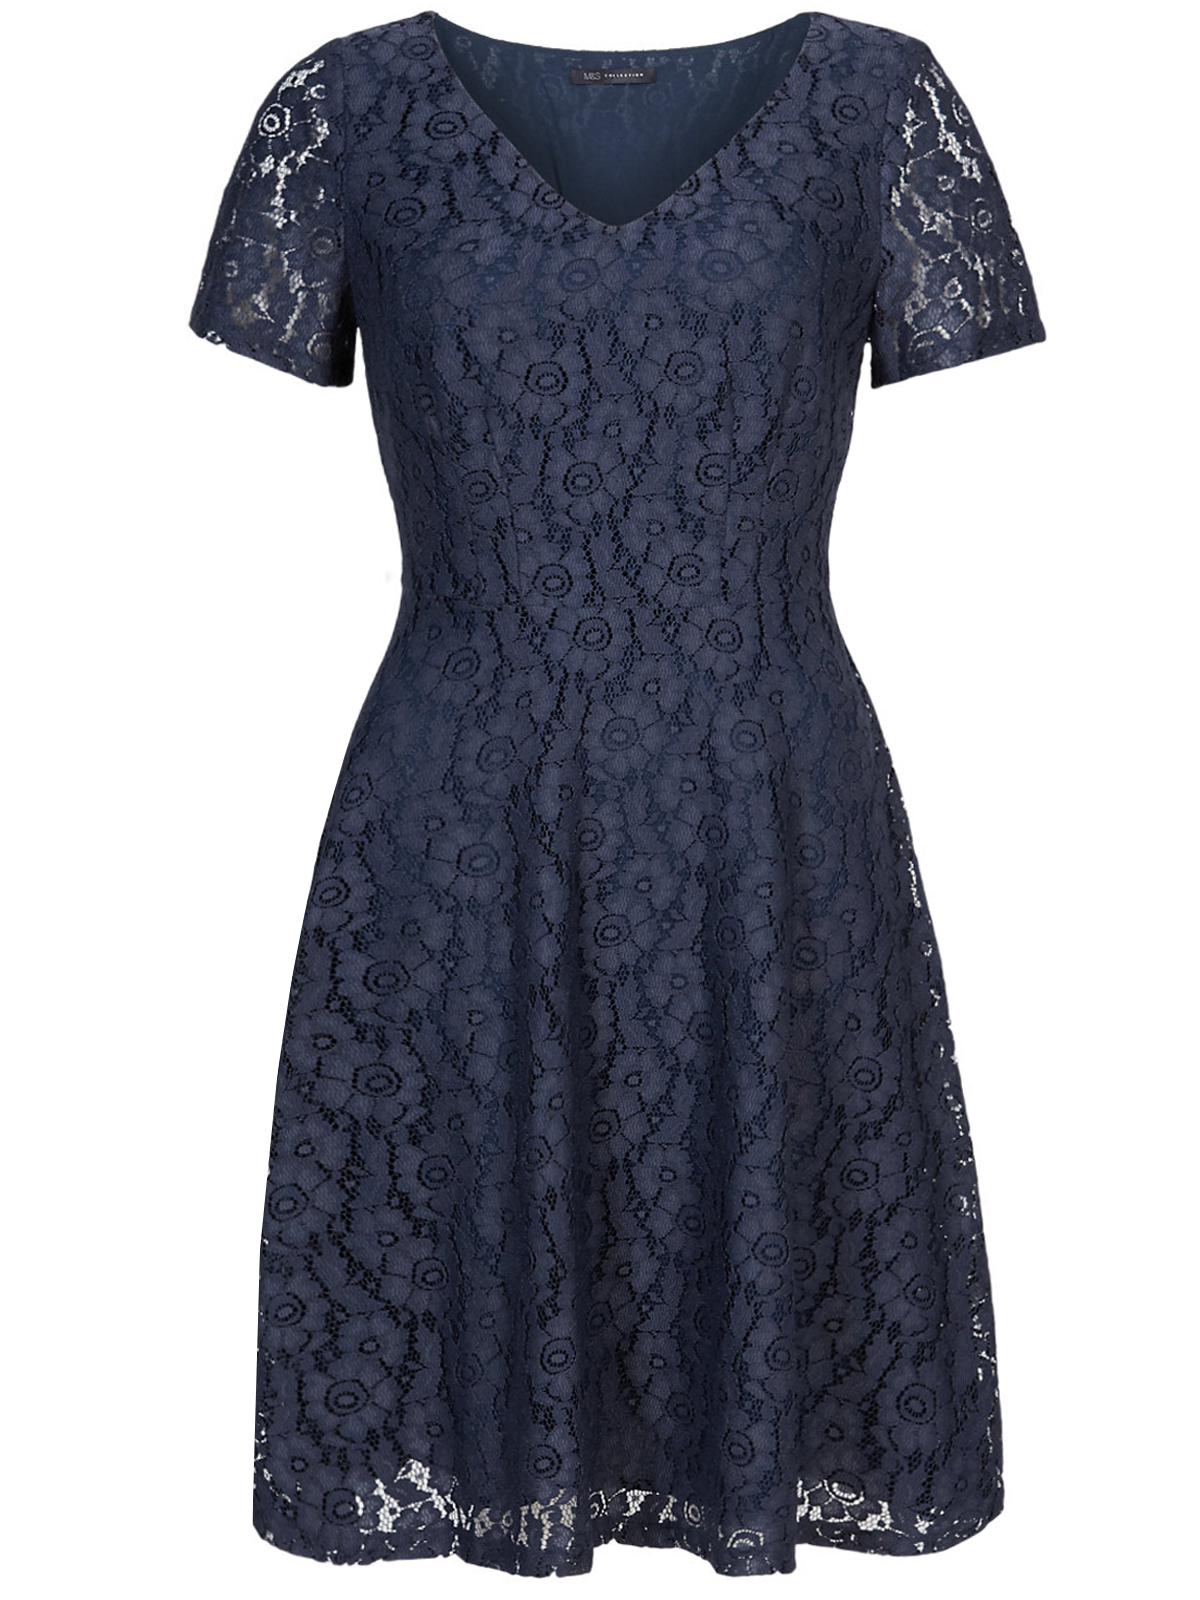 Marks and Spencer - - M&5 INDIGO Floral Lace Prom Dress - Size 8 to 20